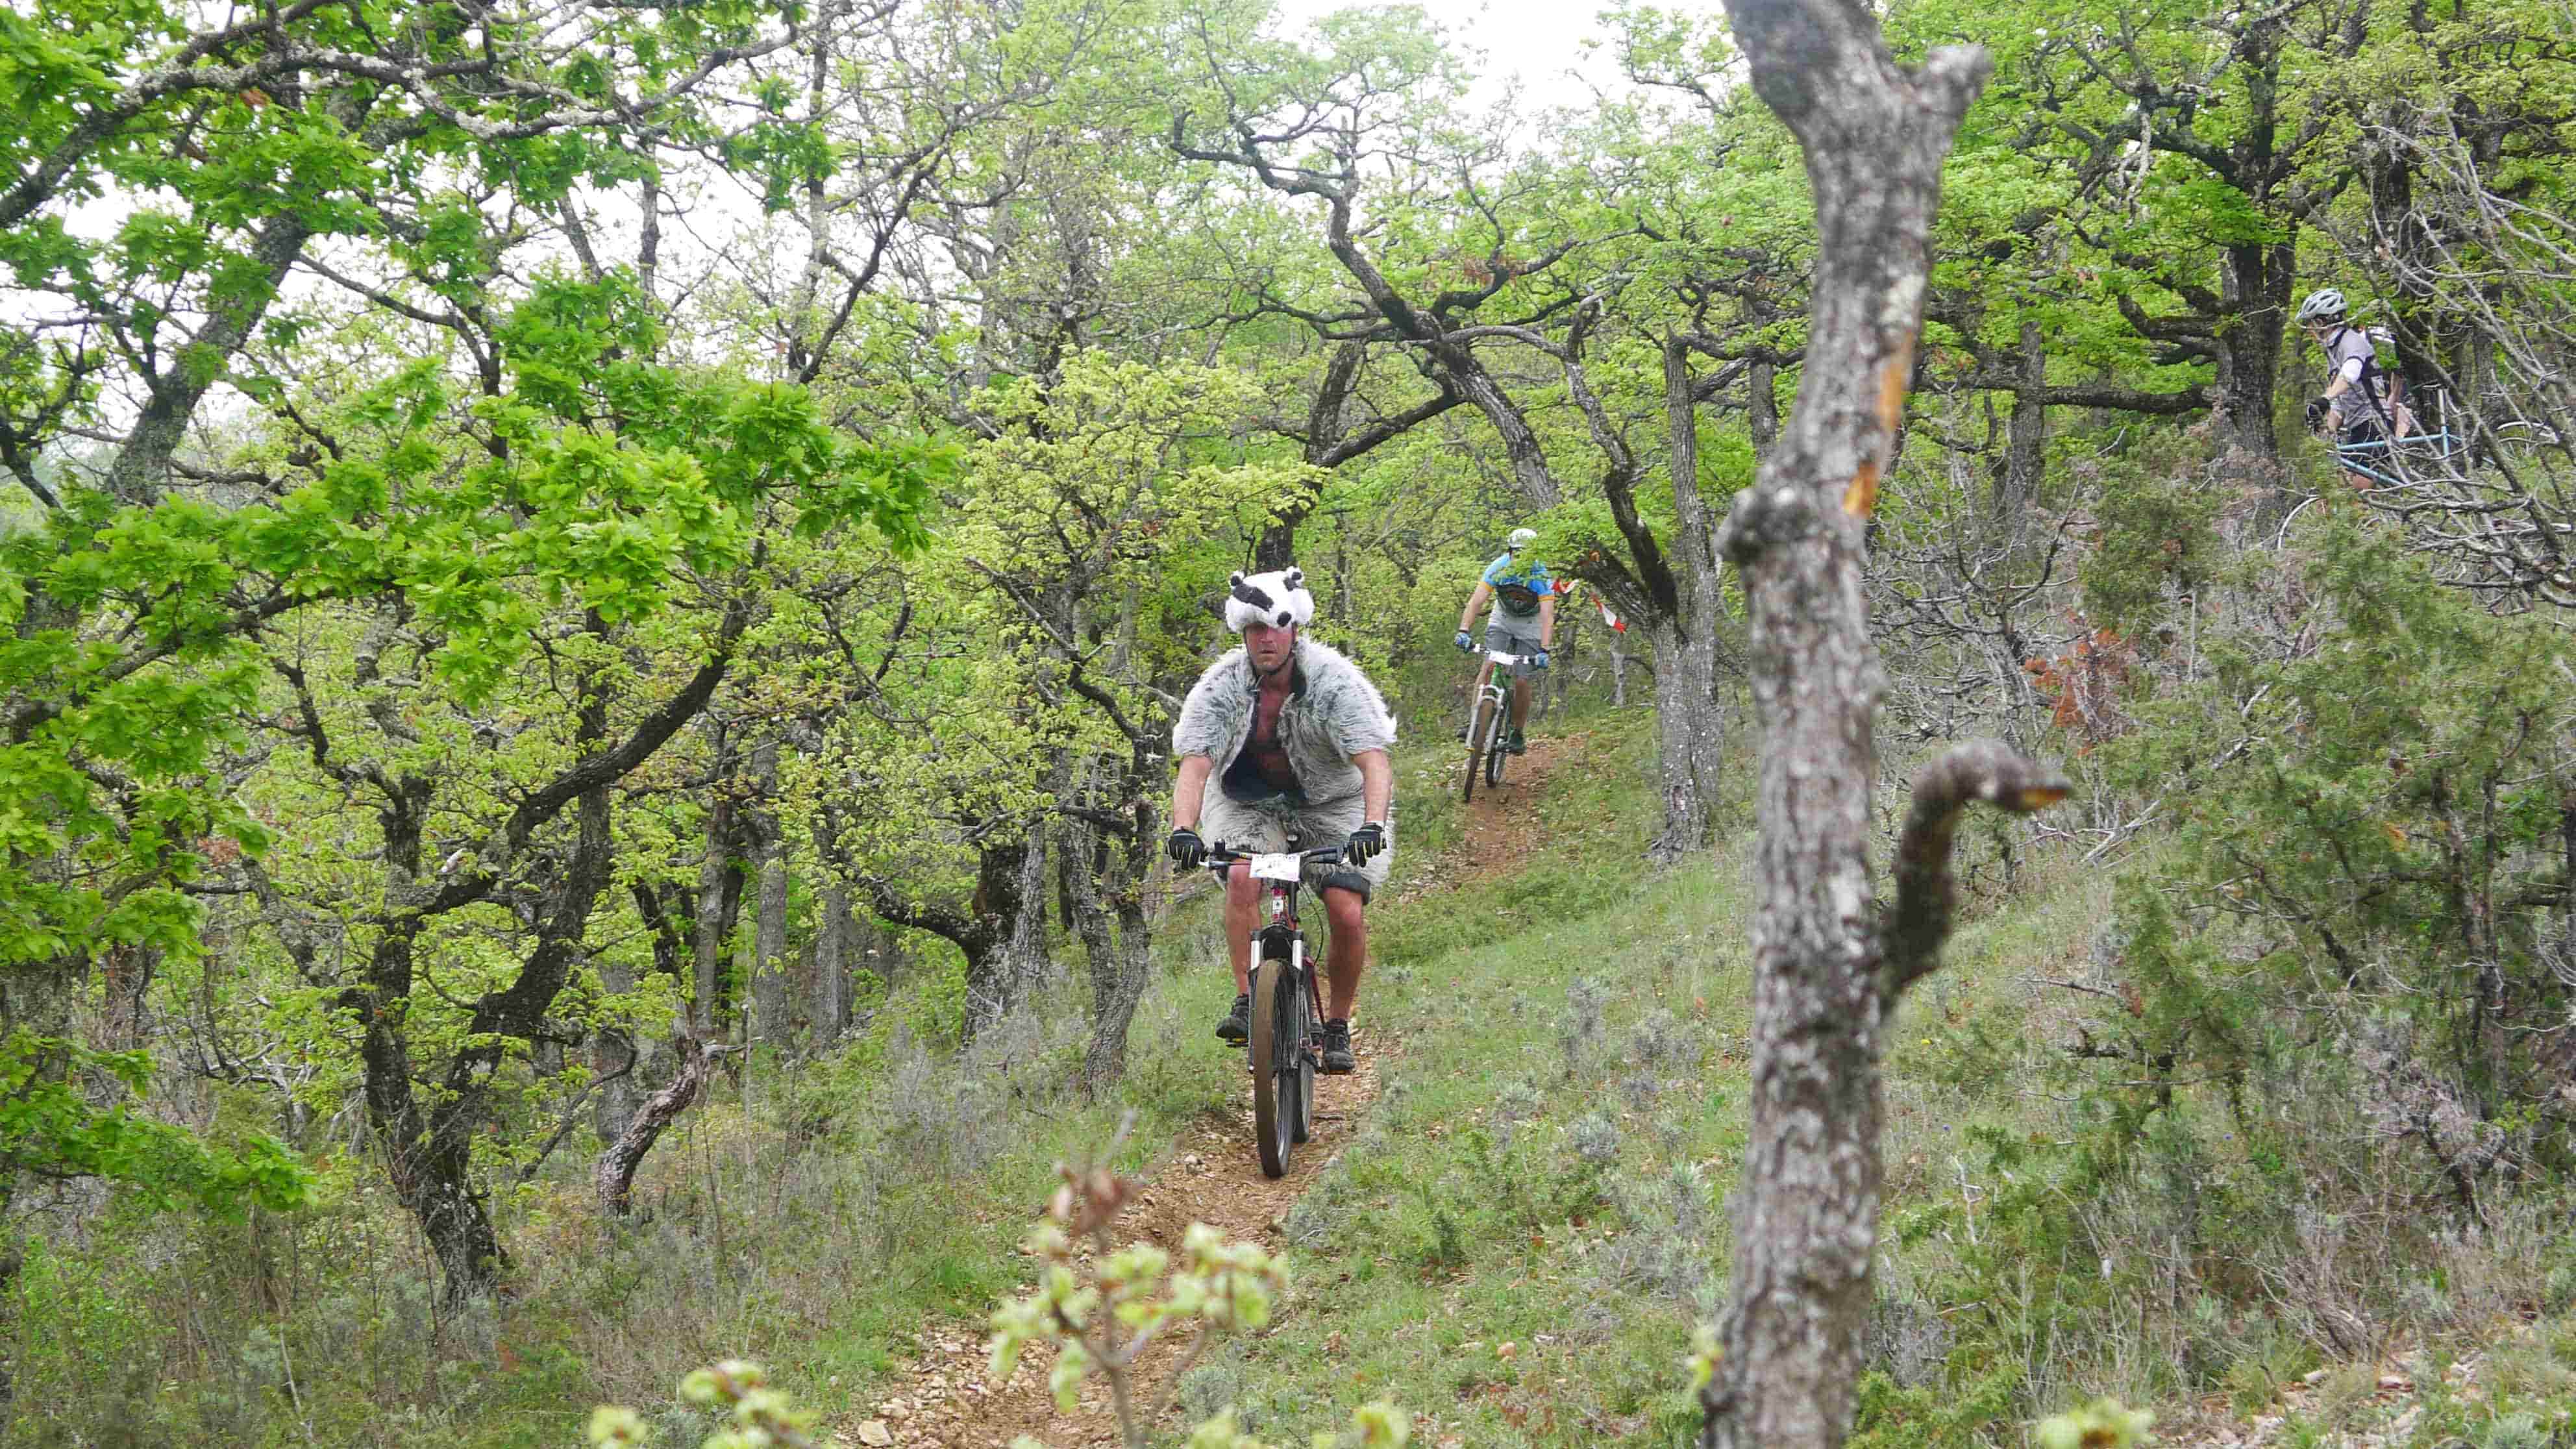 Front view of a cyclist, riding their bike on a trail with another rider behind them, in the grassy woods